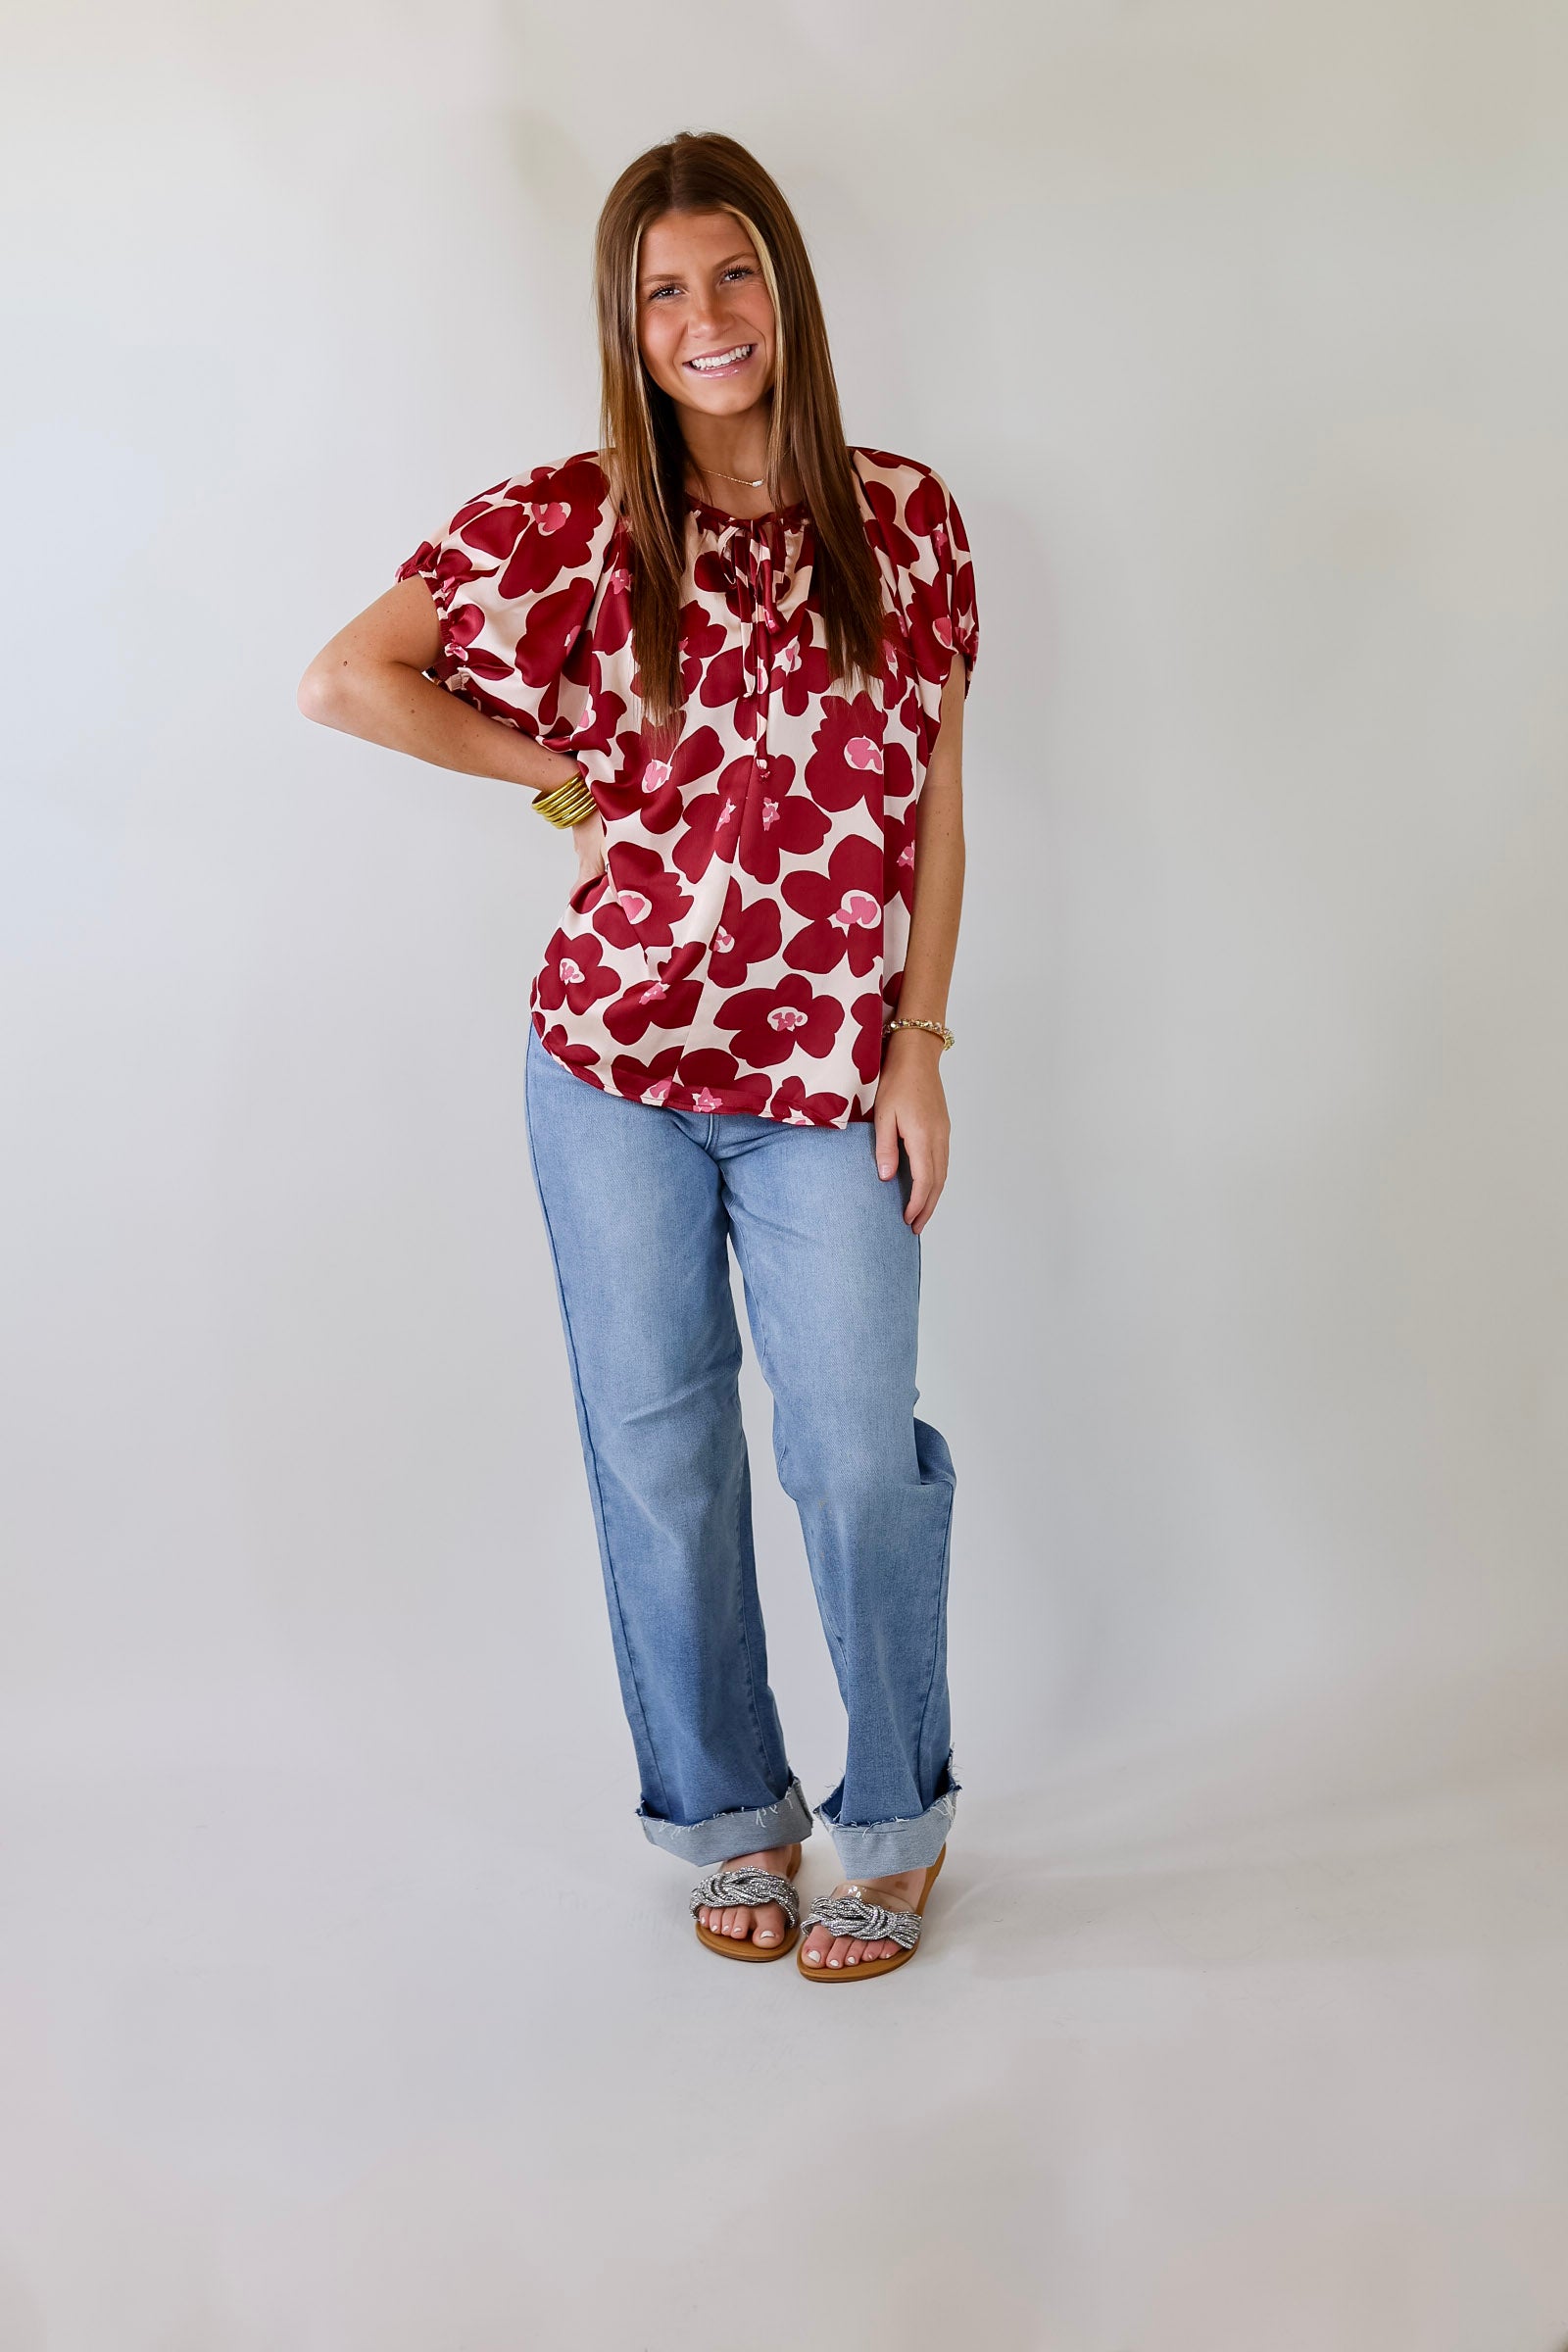 Counting Kisses Short Sleeve Floral Top with Keyhole in Maroon - Giddy Up Glamour Boutique